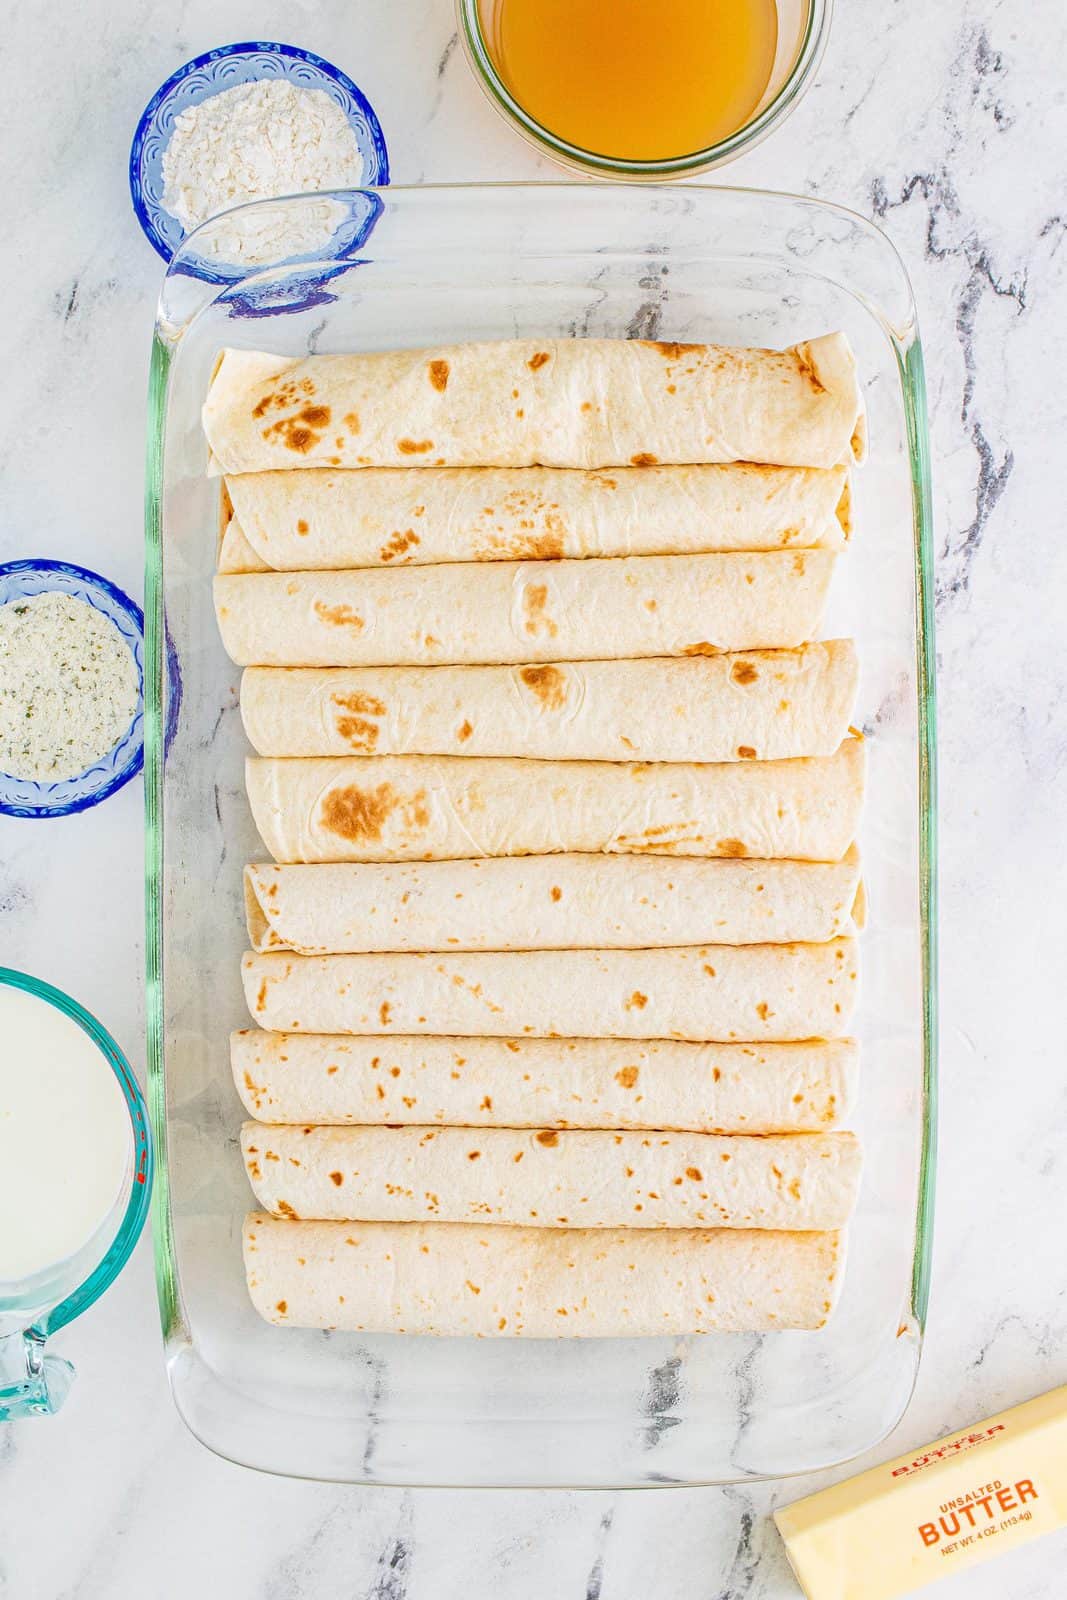 Rolled tortillas placed in prepared pan.